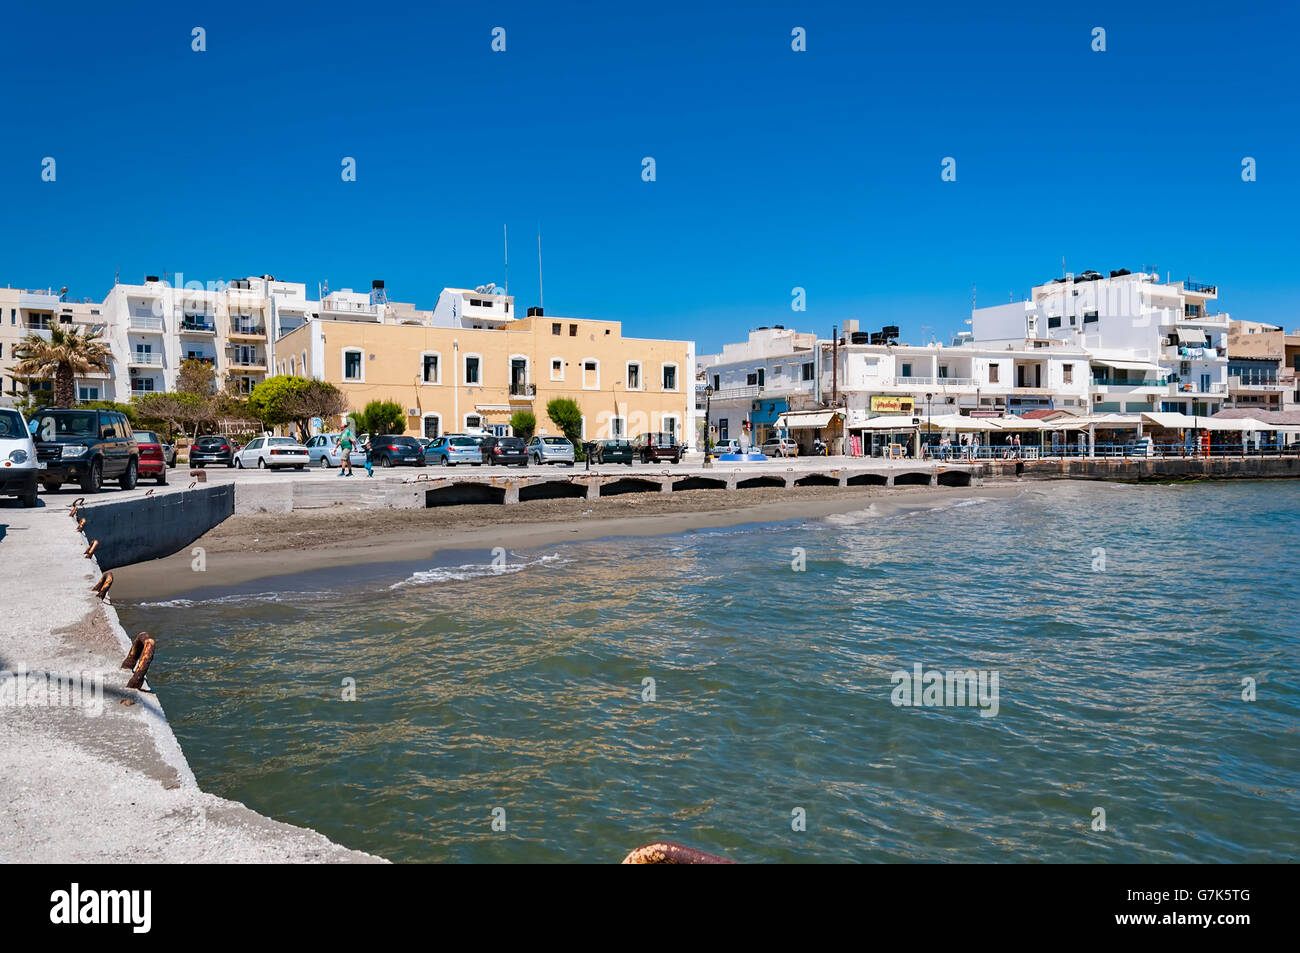 An image of the southern coastal town of Lerapetra on the Greek island of Crete. Stock Photo